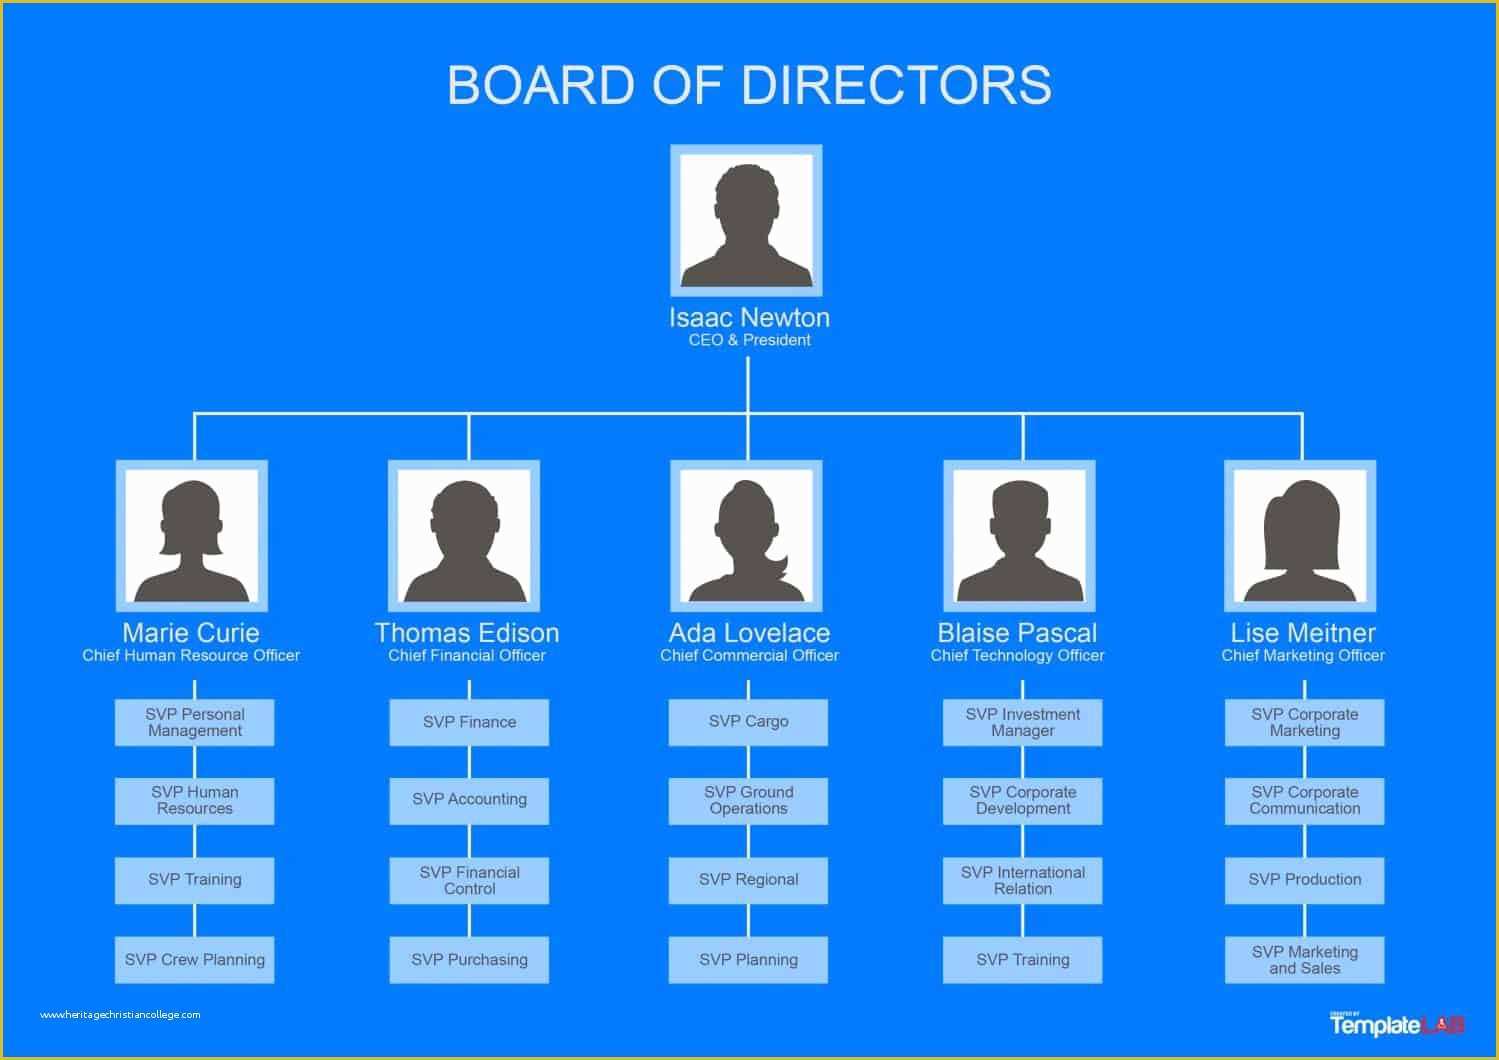 Organizational Chart Template Free Download Of 40 organizational Chart Templates Word Excel Powerpoint